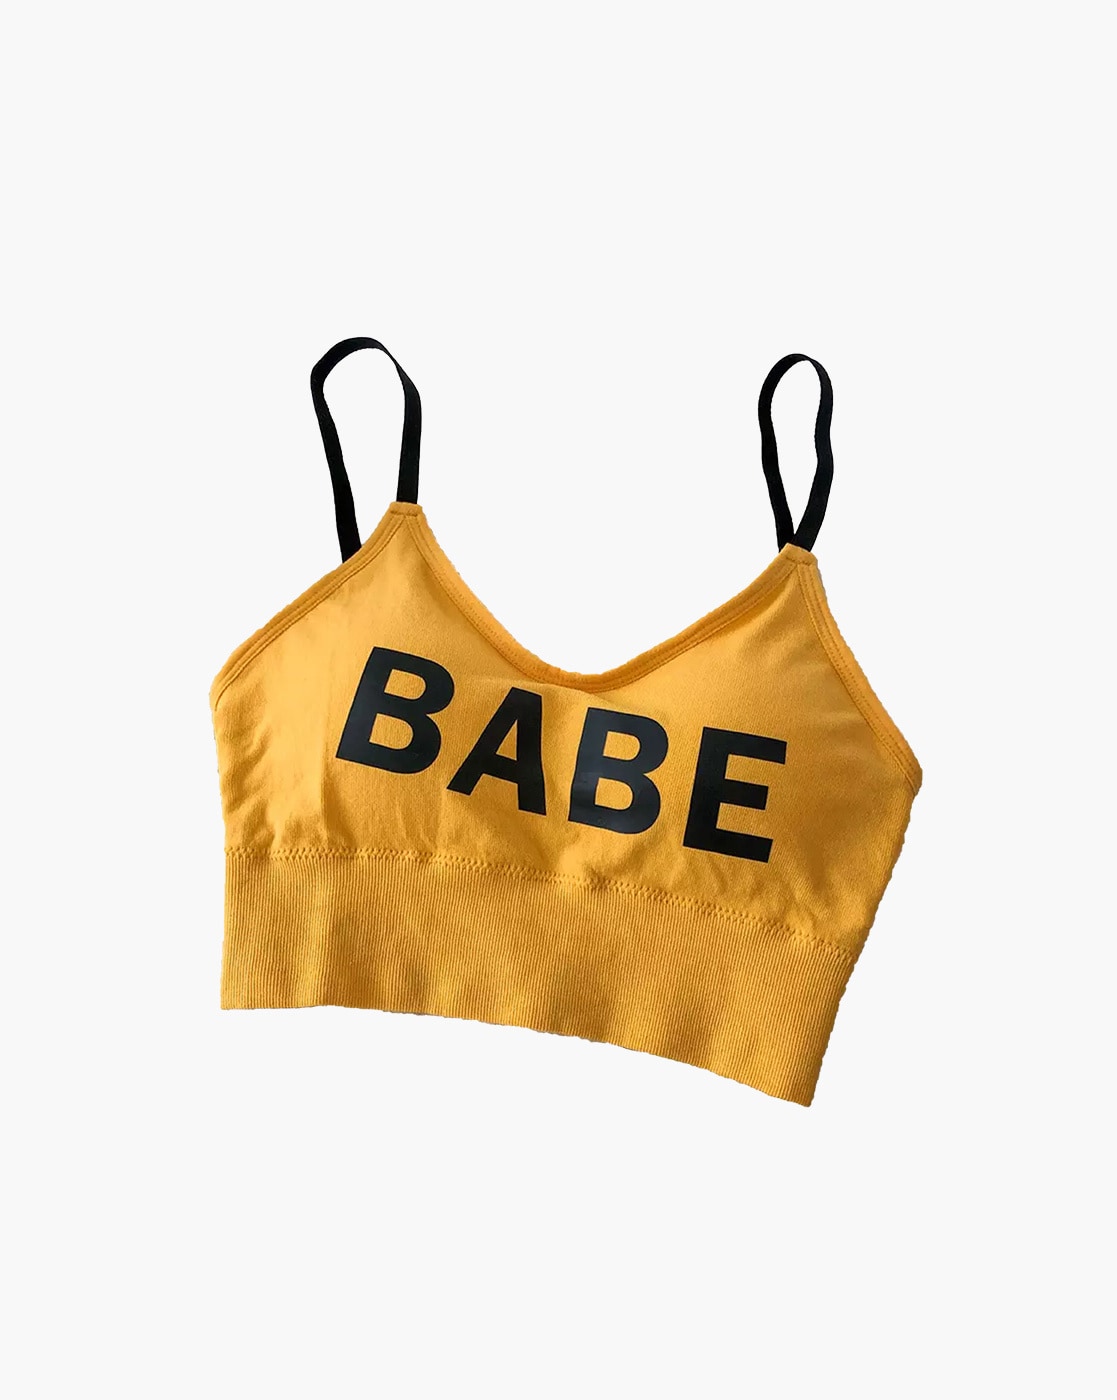 Mustard Yellow Polka Dots Sports Bra - Buy Sports Bras Online at Best Price  Range in India by Antherr – ANTHERR